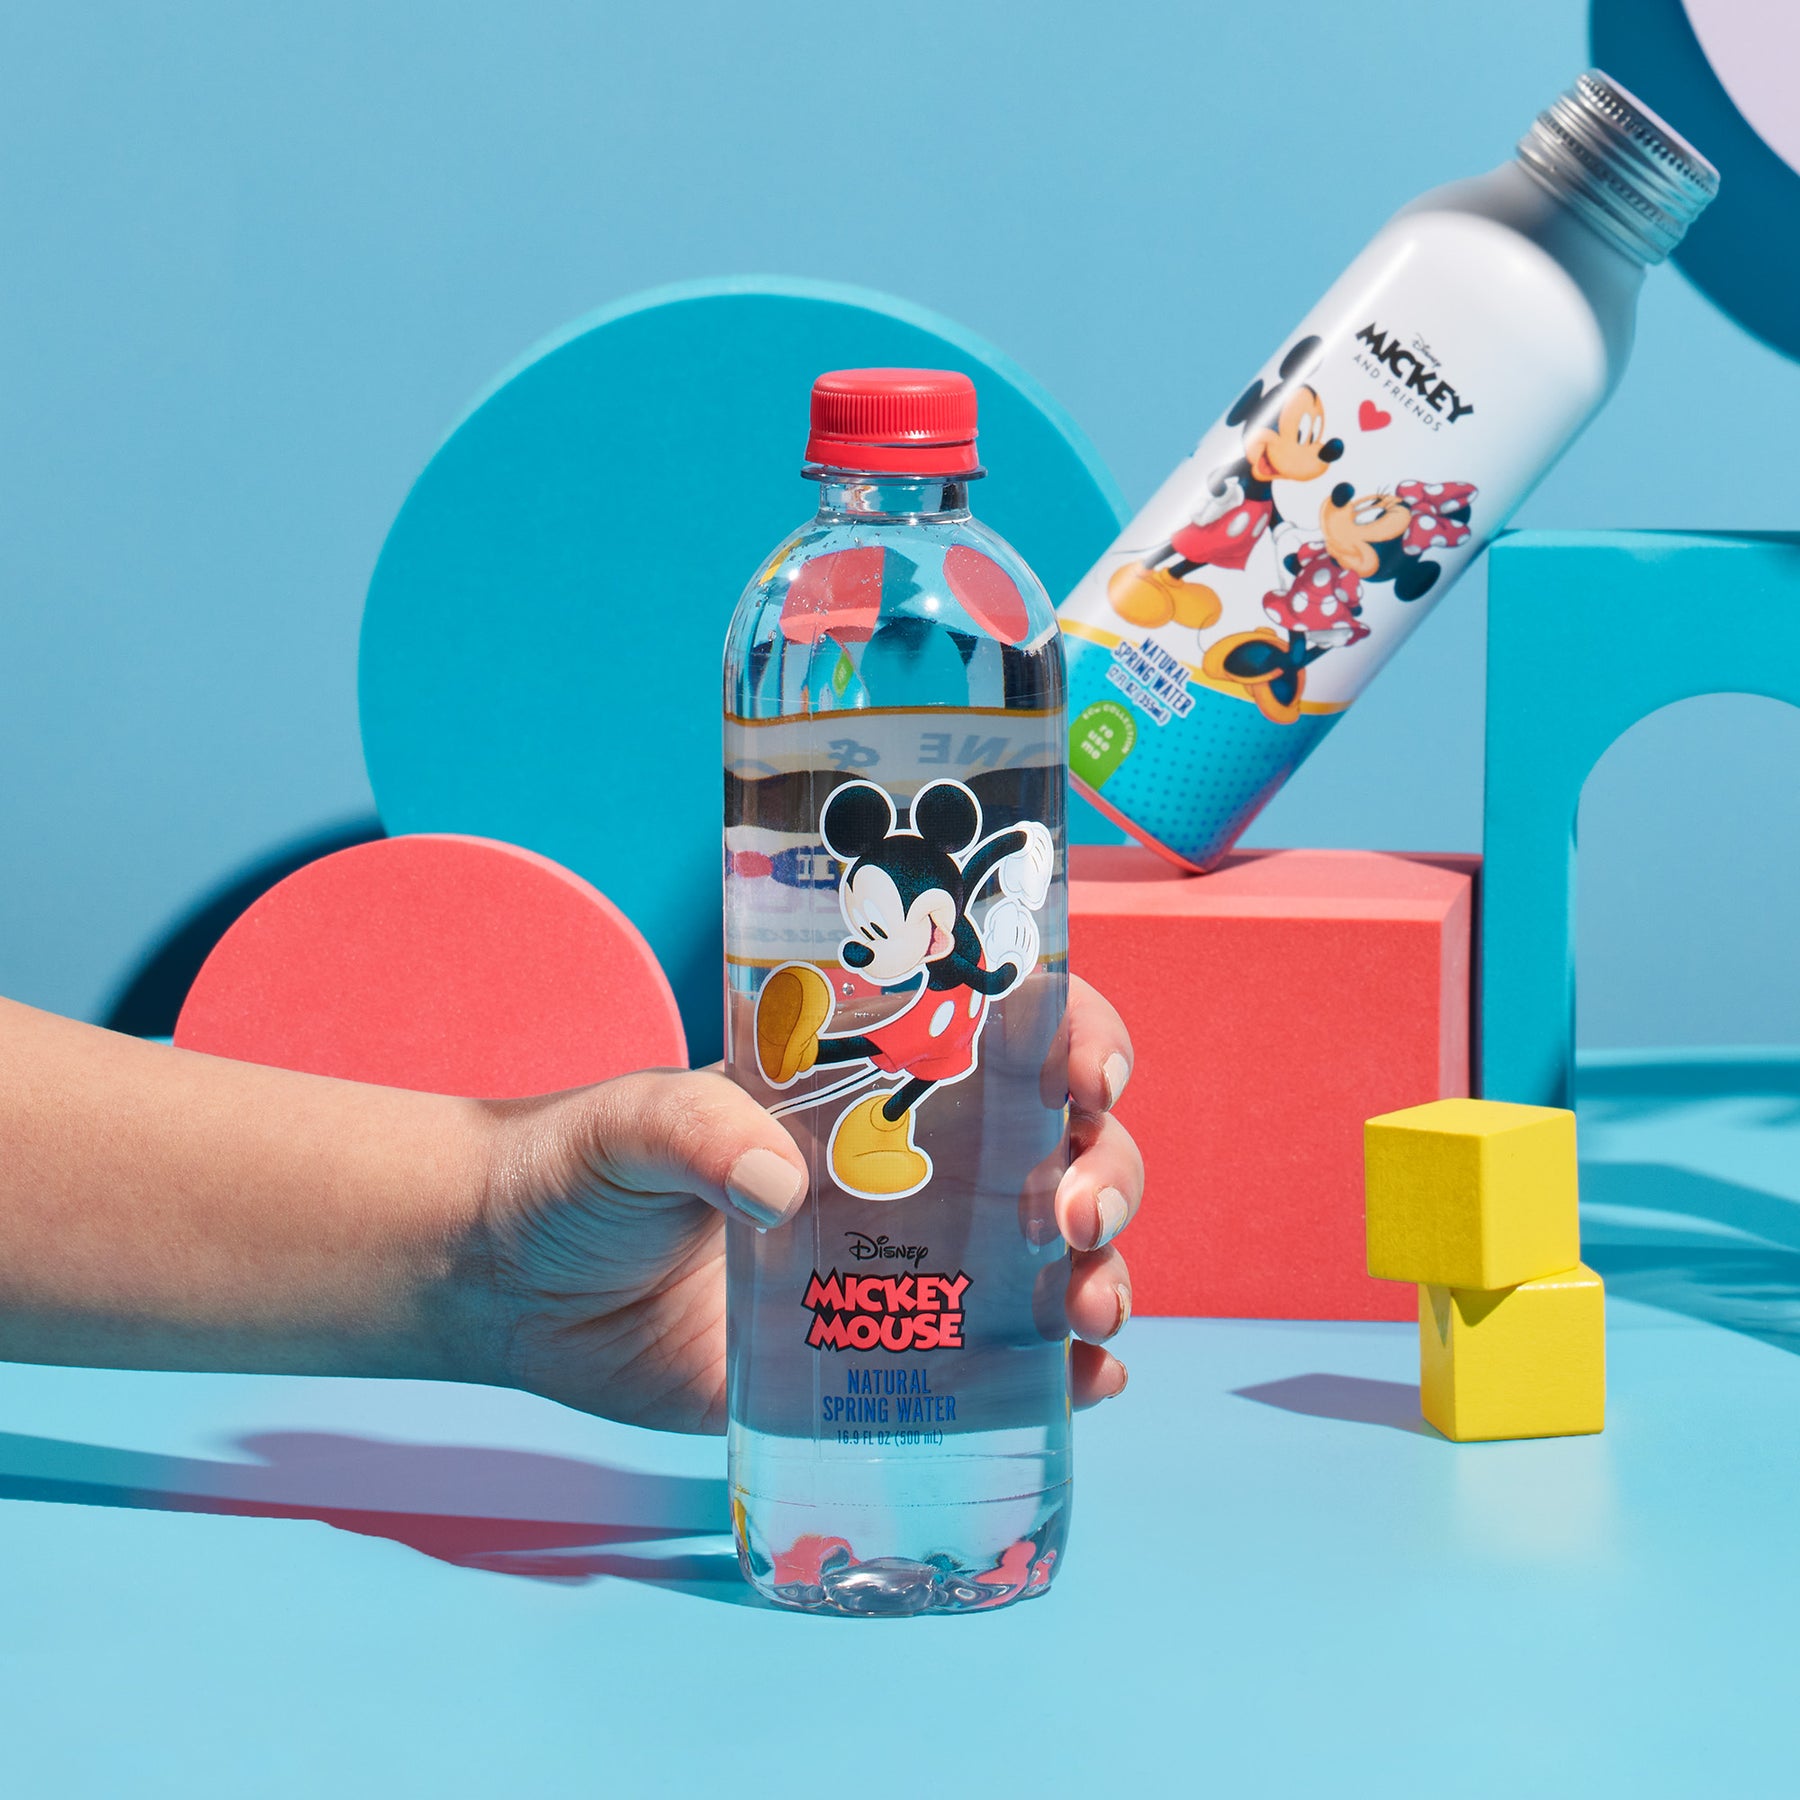 Disney Mickey Mouse Bottled Water, Natural Spring Water